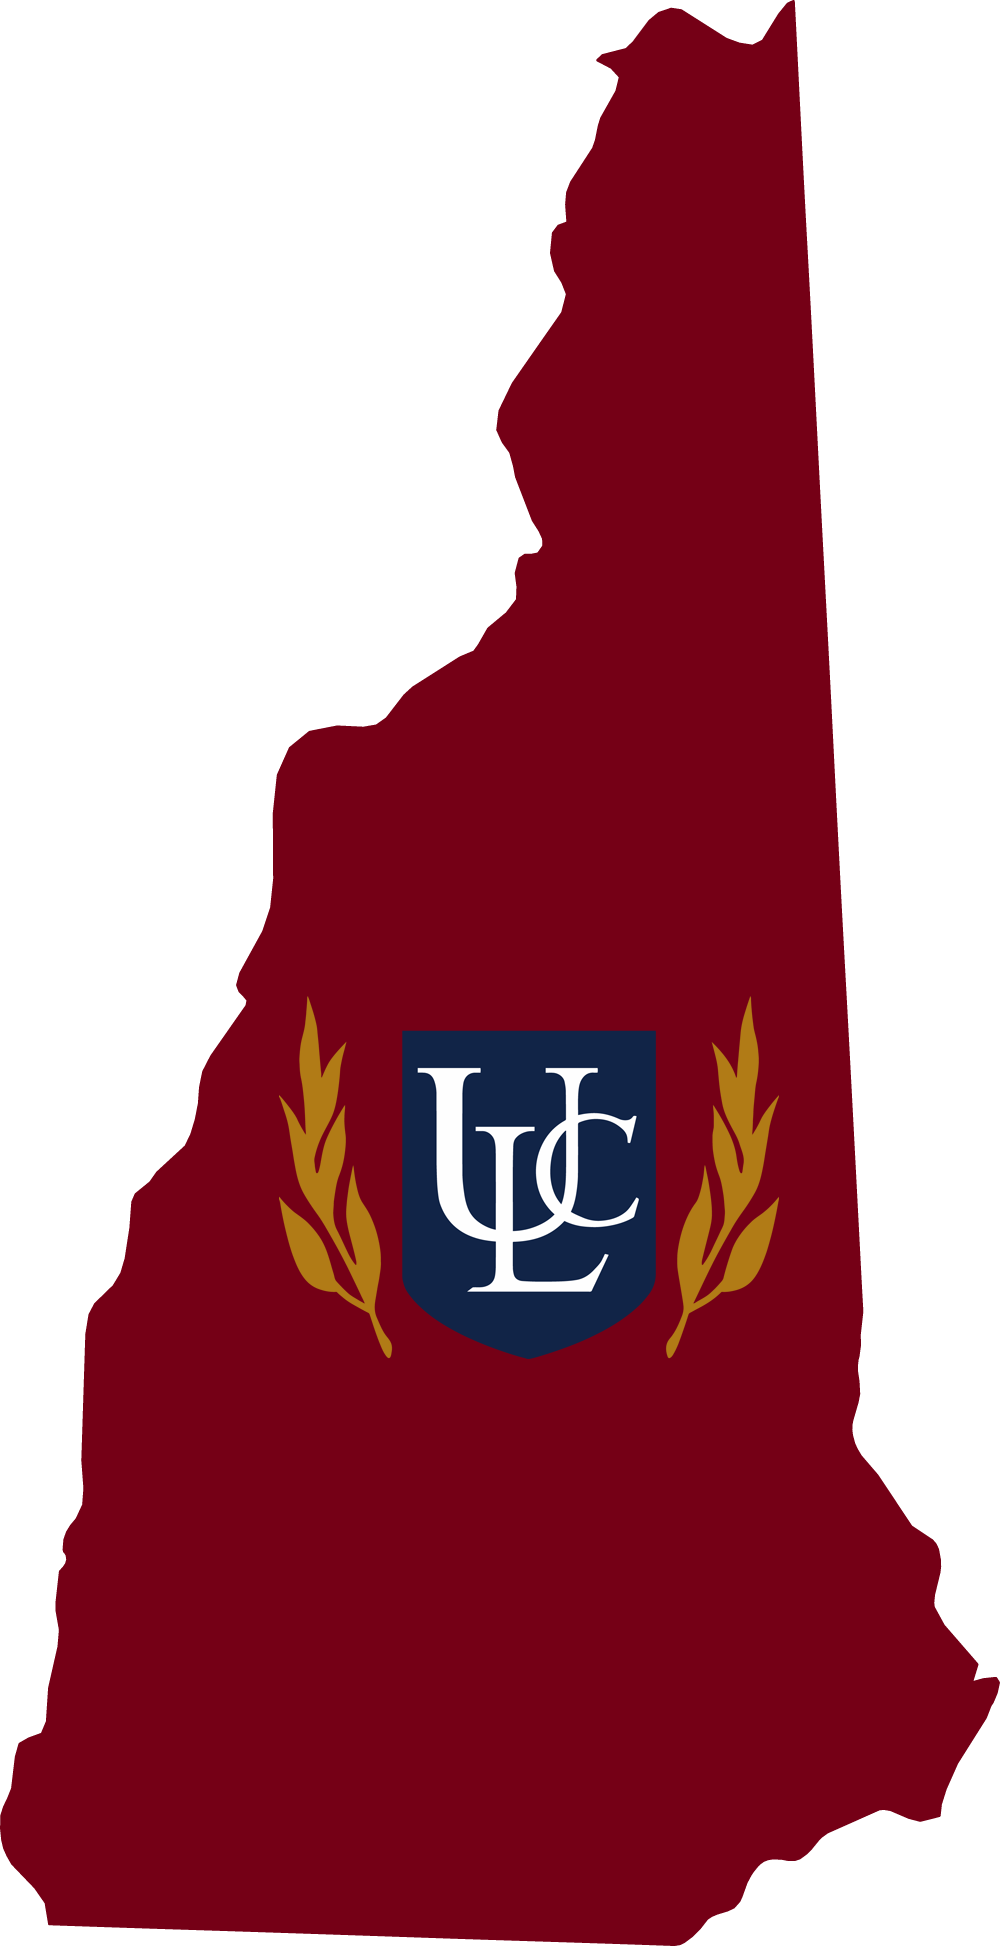 An outline of New Hampshire with the ULC logo